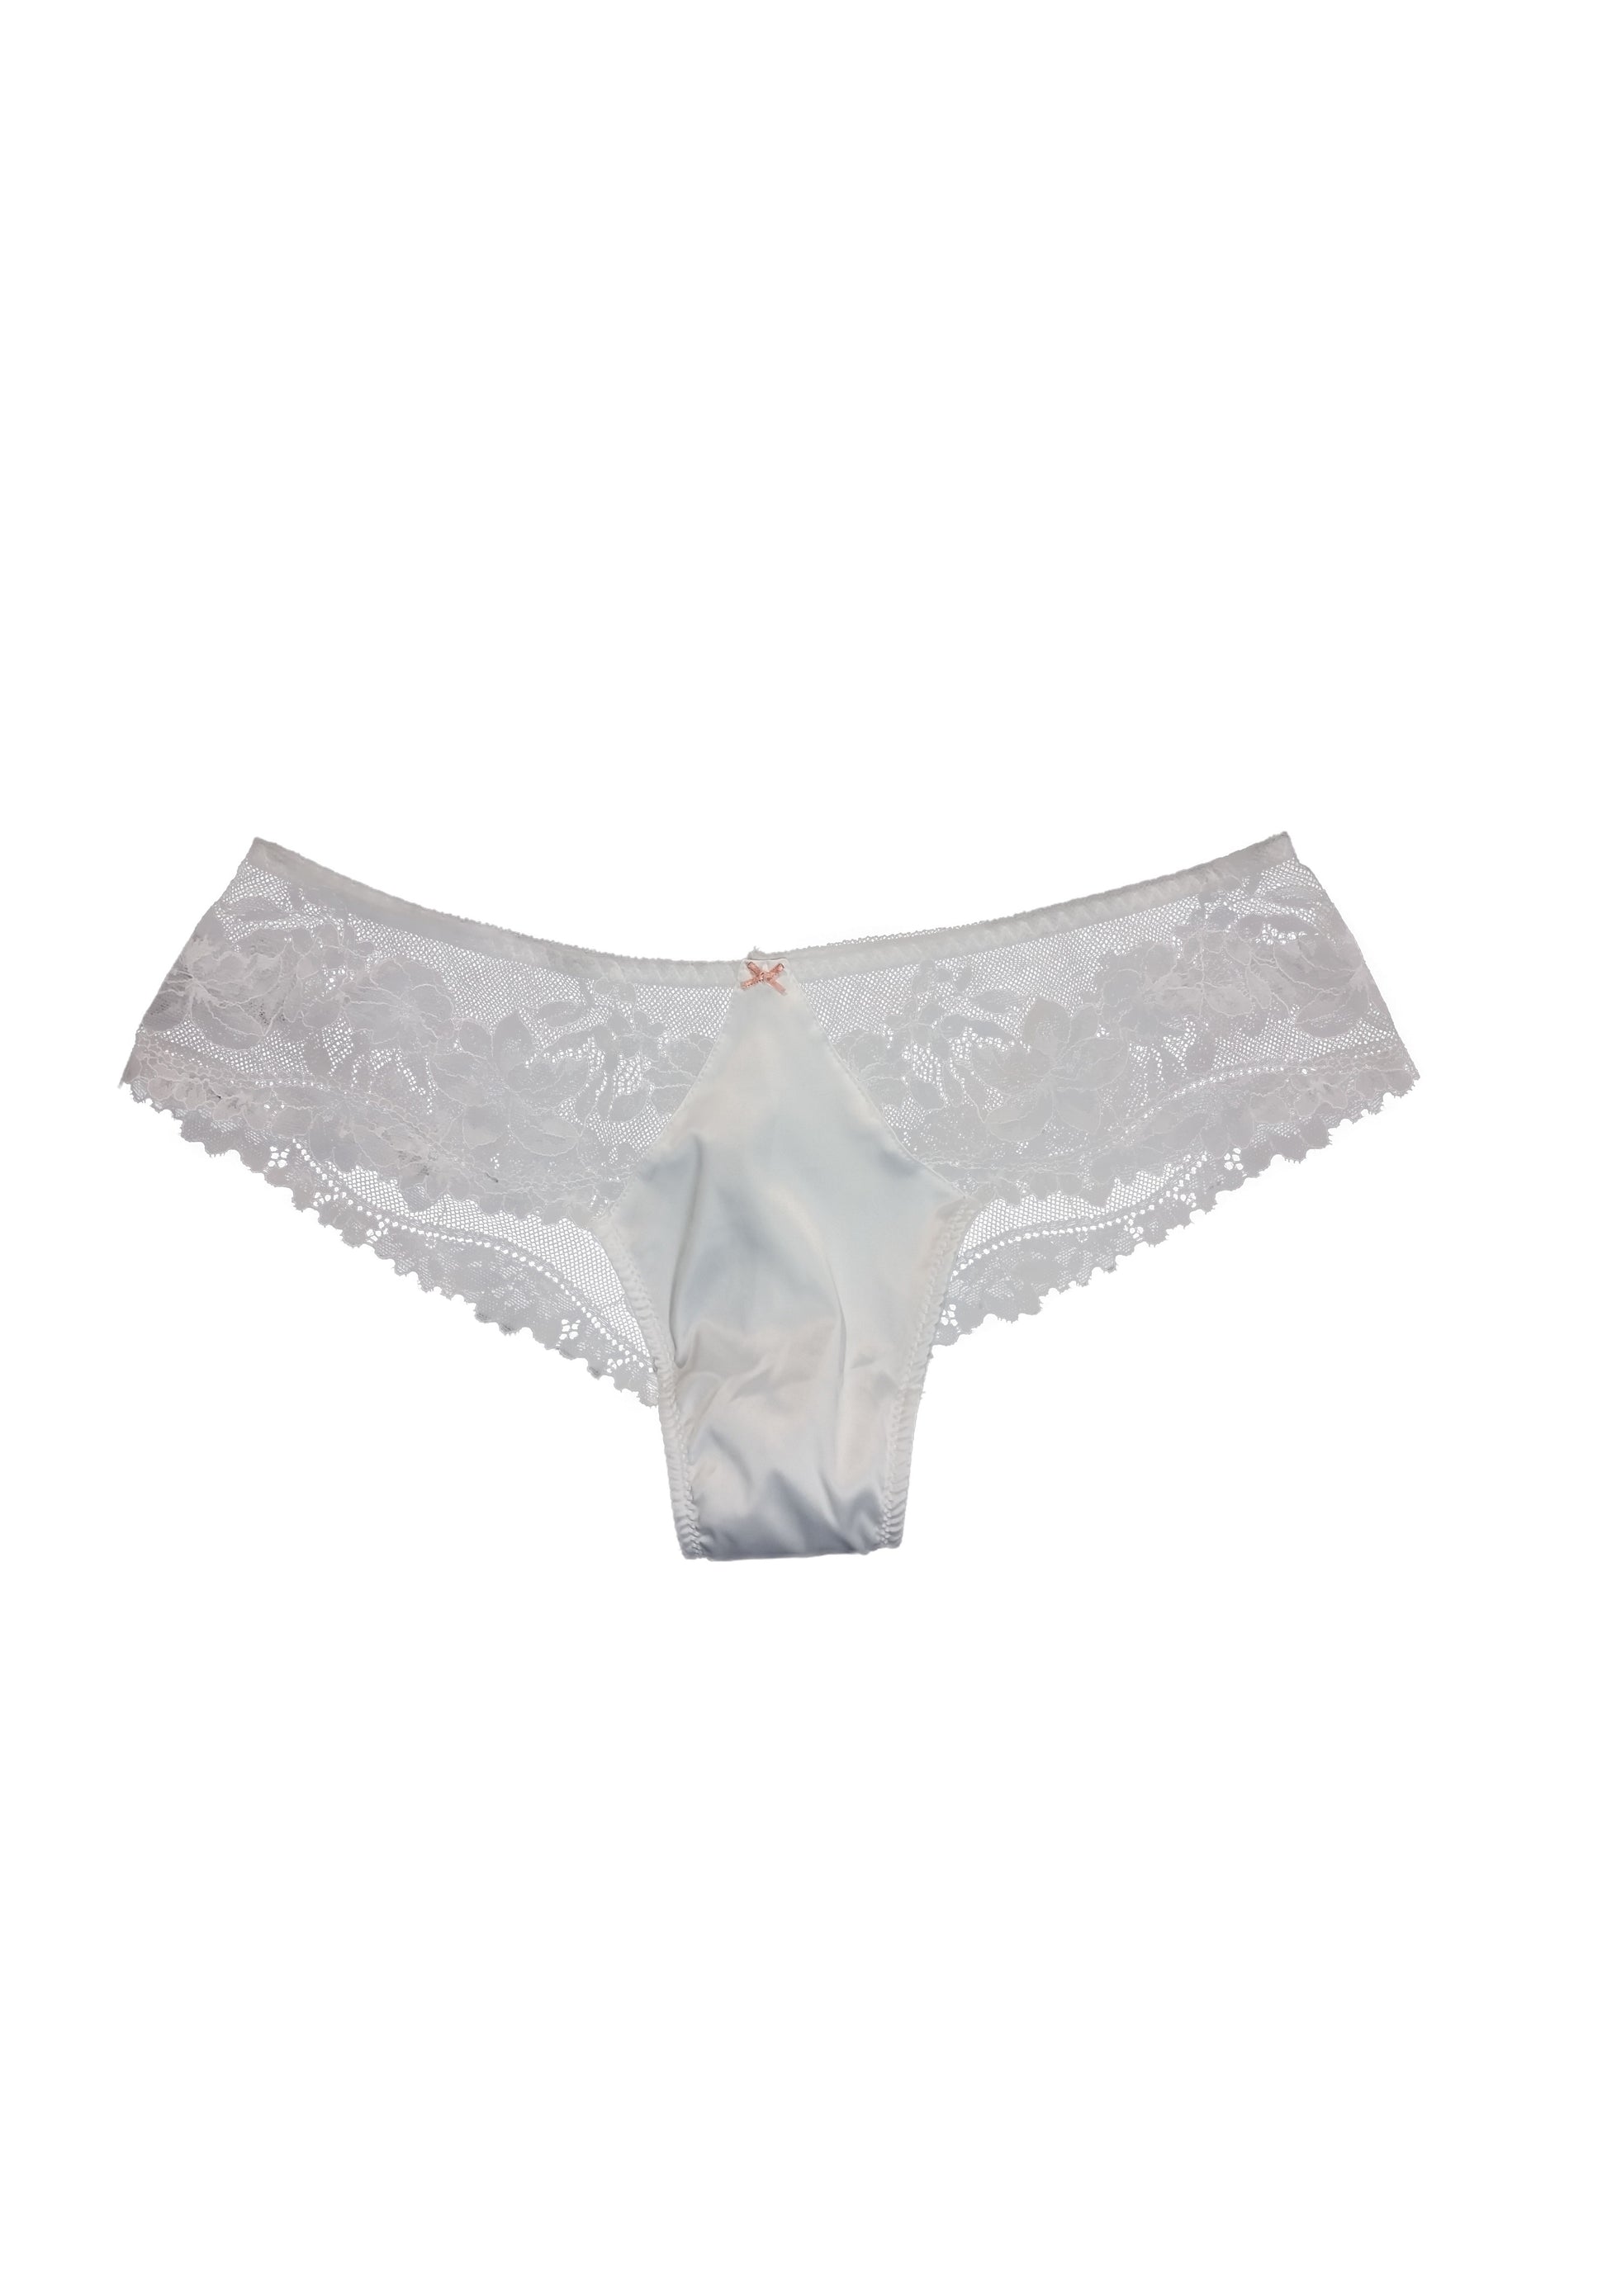 Collection My lace - Unlined Bra and brazilian Panty - Leilieve - Women  Underwear Made in Italy since 1961